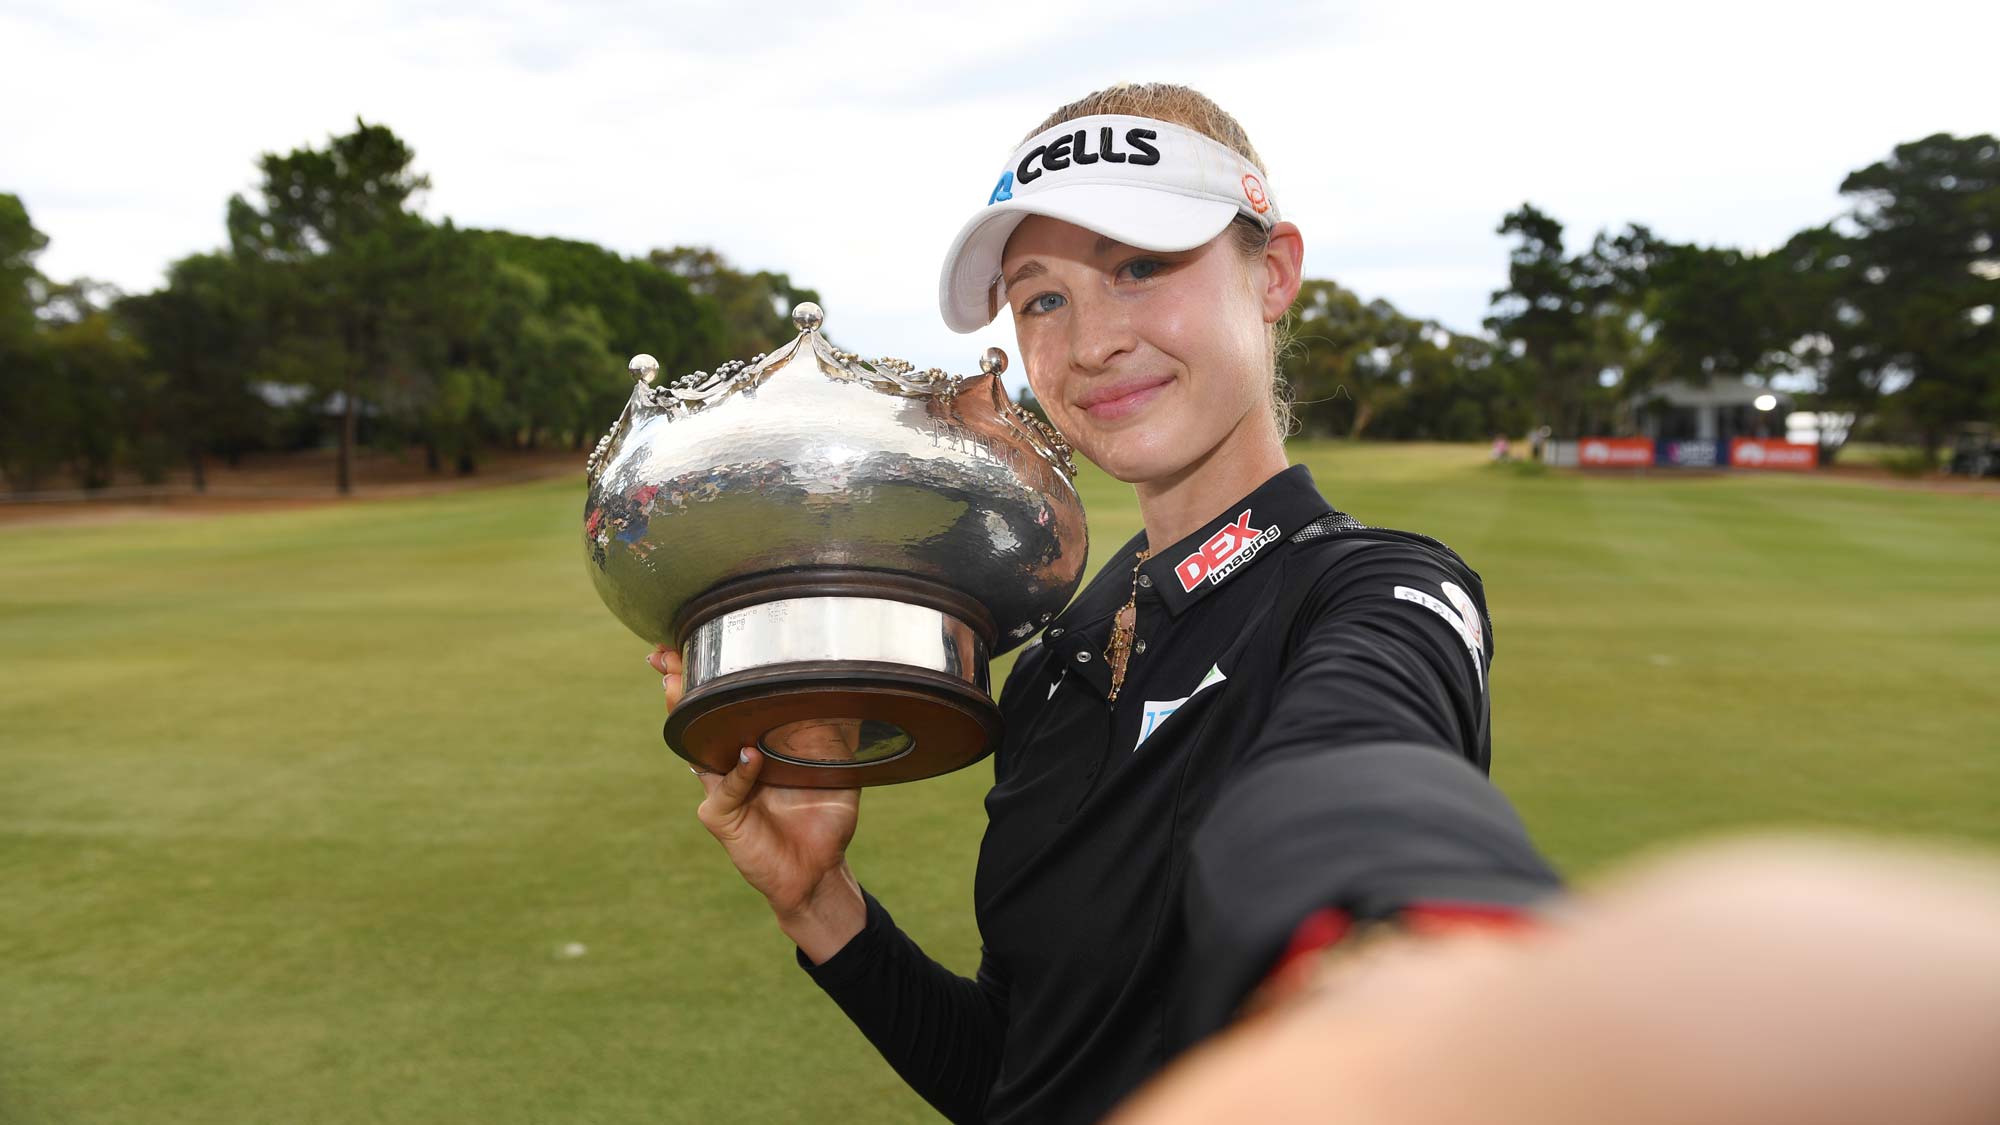 Nelly Korda has her #BagsPacked for the 2020 Diamond Resorts Tournament of Champions presented by IOA after her victory at the ISPS Women's Australian Open